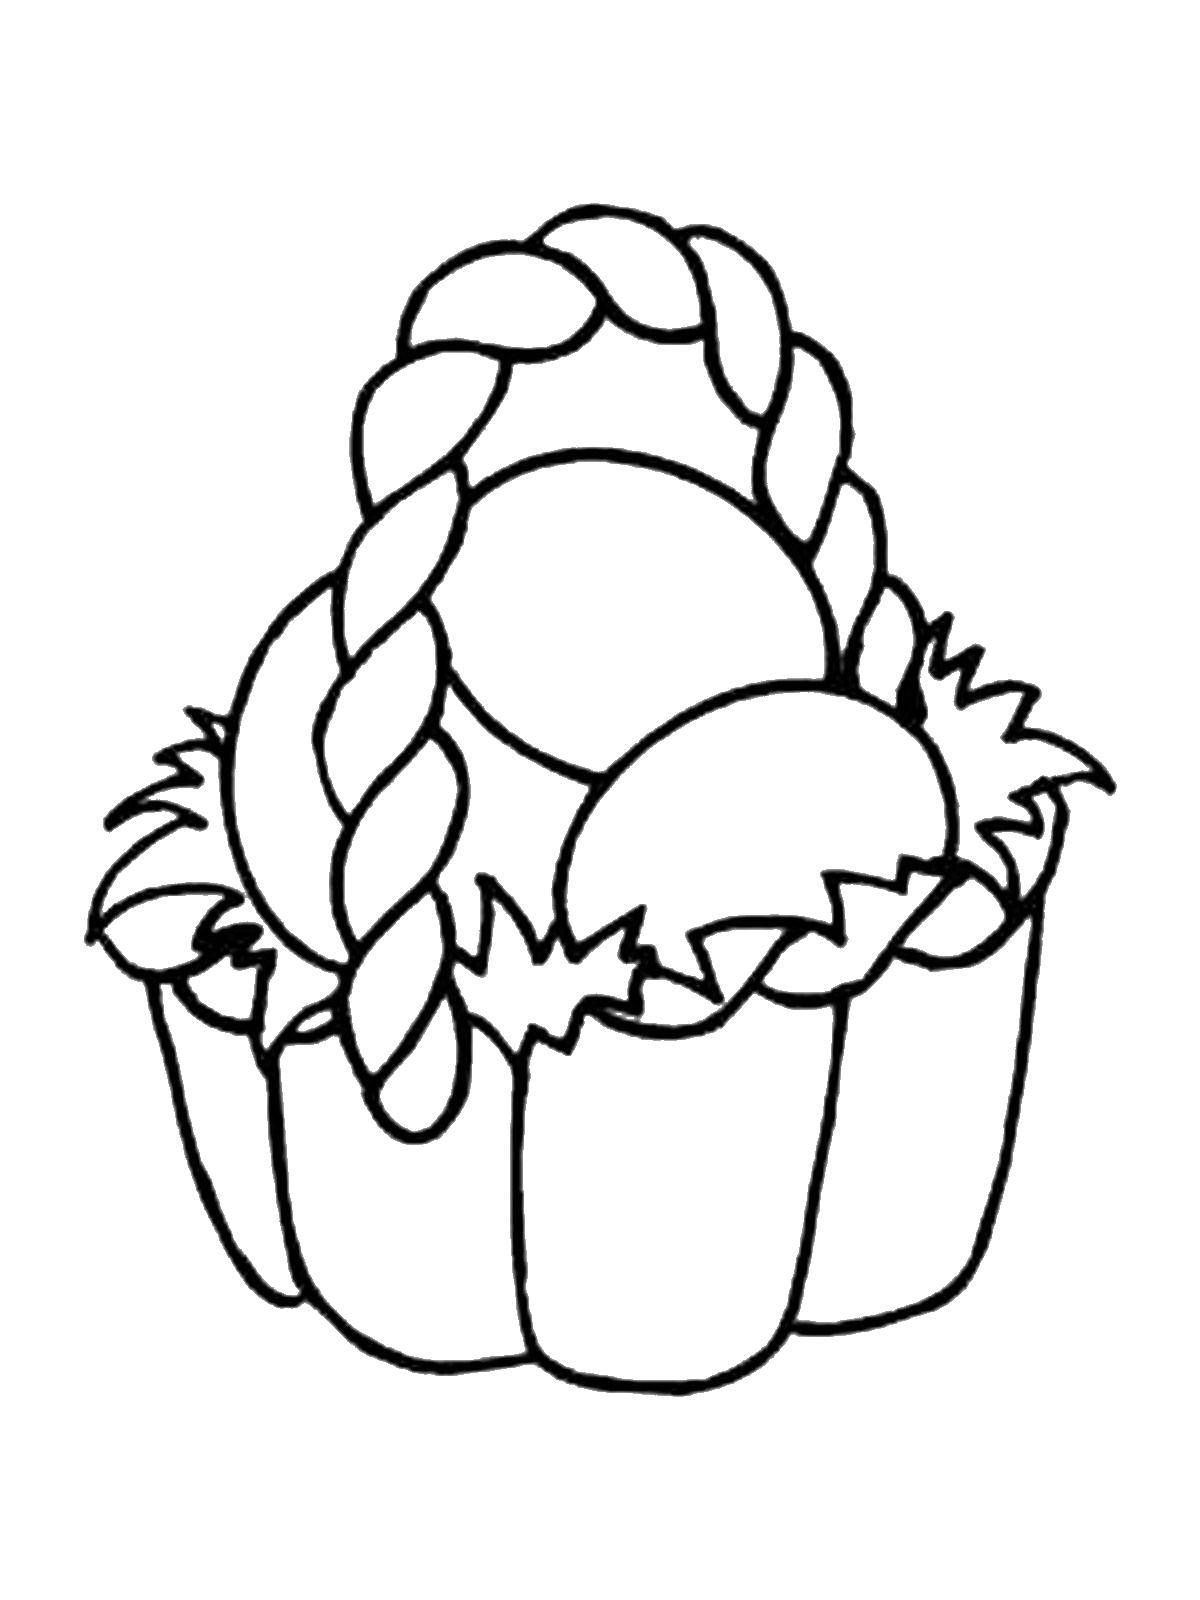 Coloring Easter eggs in a basket. Category Easter. Tags:  Easter, eggs, patterns.